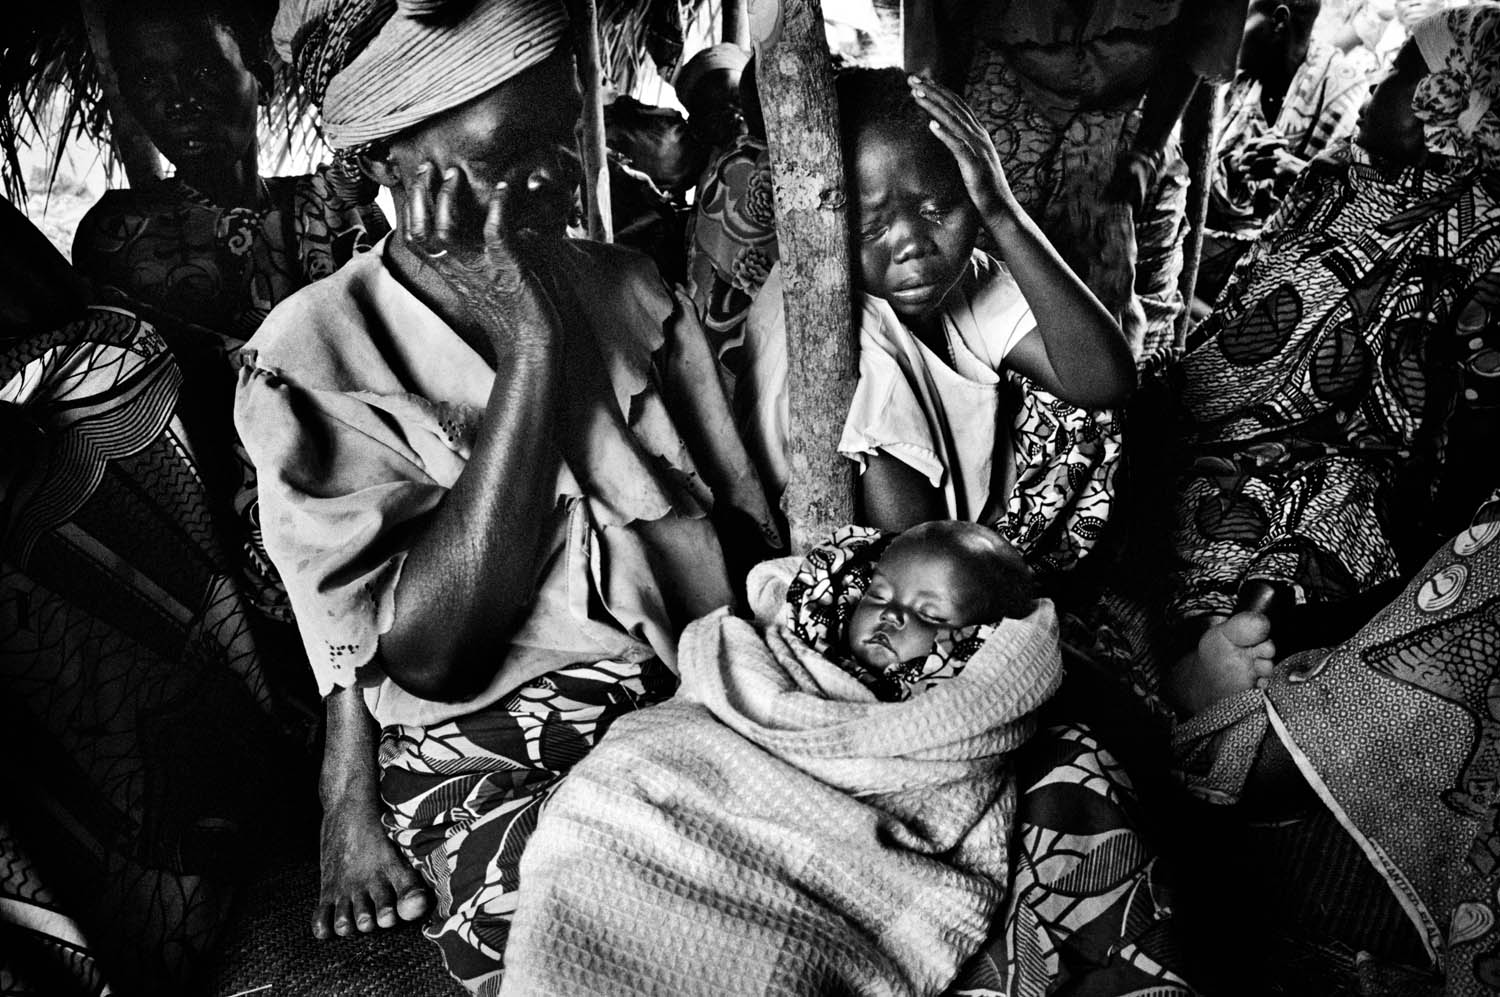 The funeral of Henry Konerala, 10-months-old, who died from diarrhea and vomiting a few days after arriving in the Gety camp, 2006. He was one of eighteen people who died that day, just before Congo's historic elections.